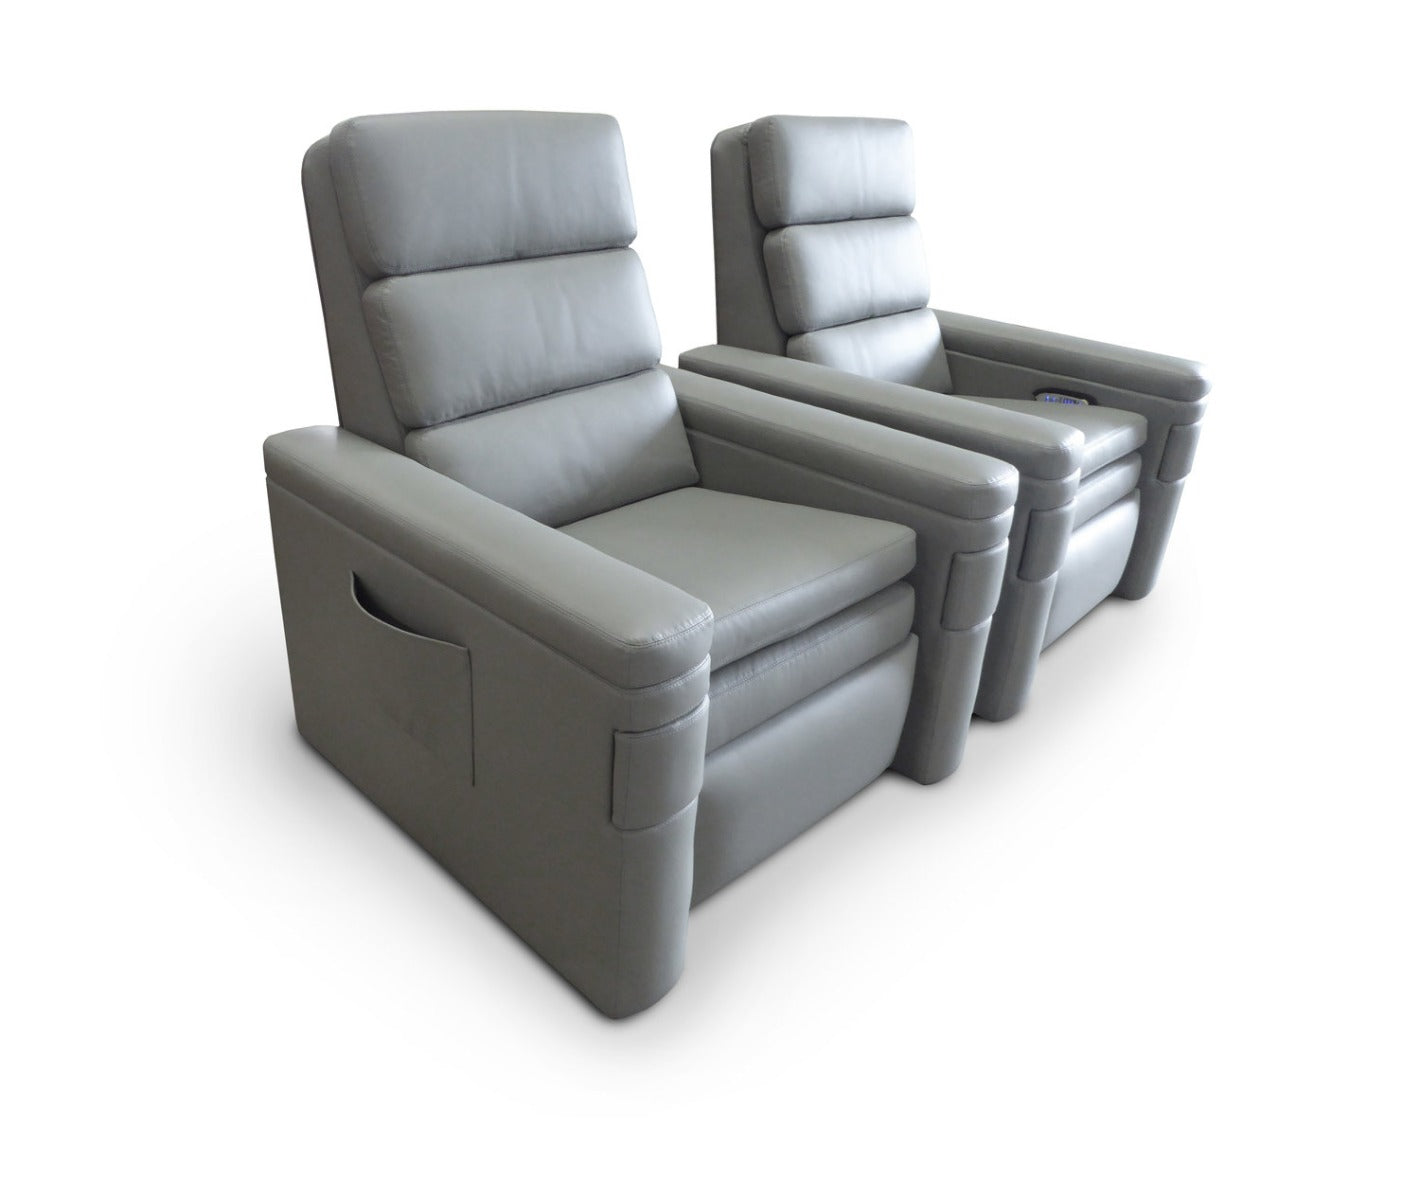 Fortress Seating Solo